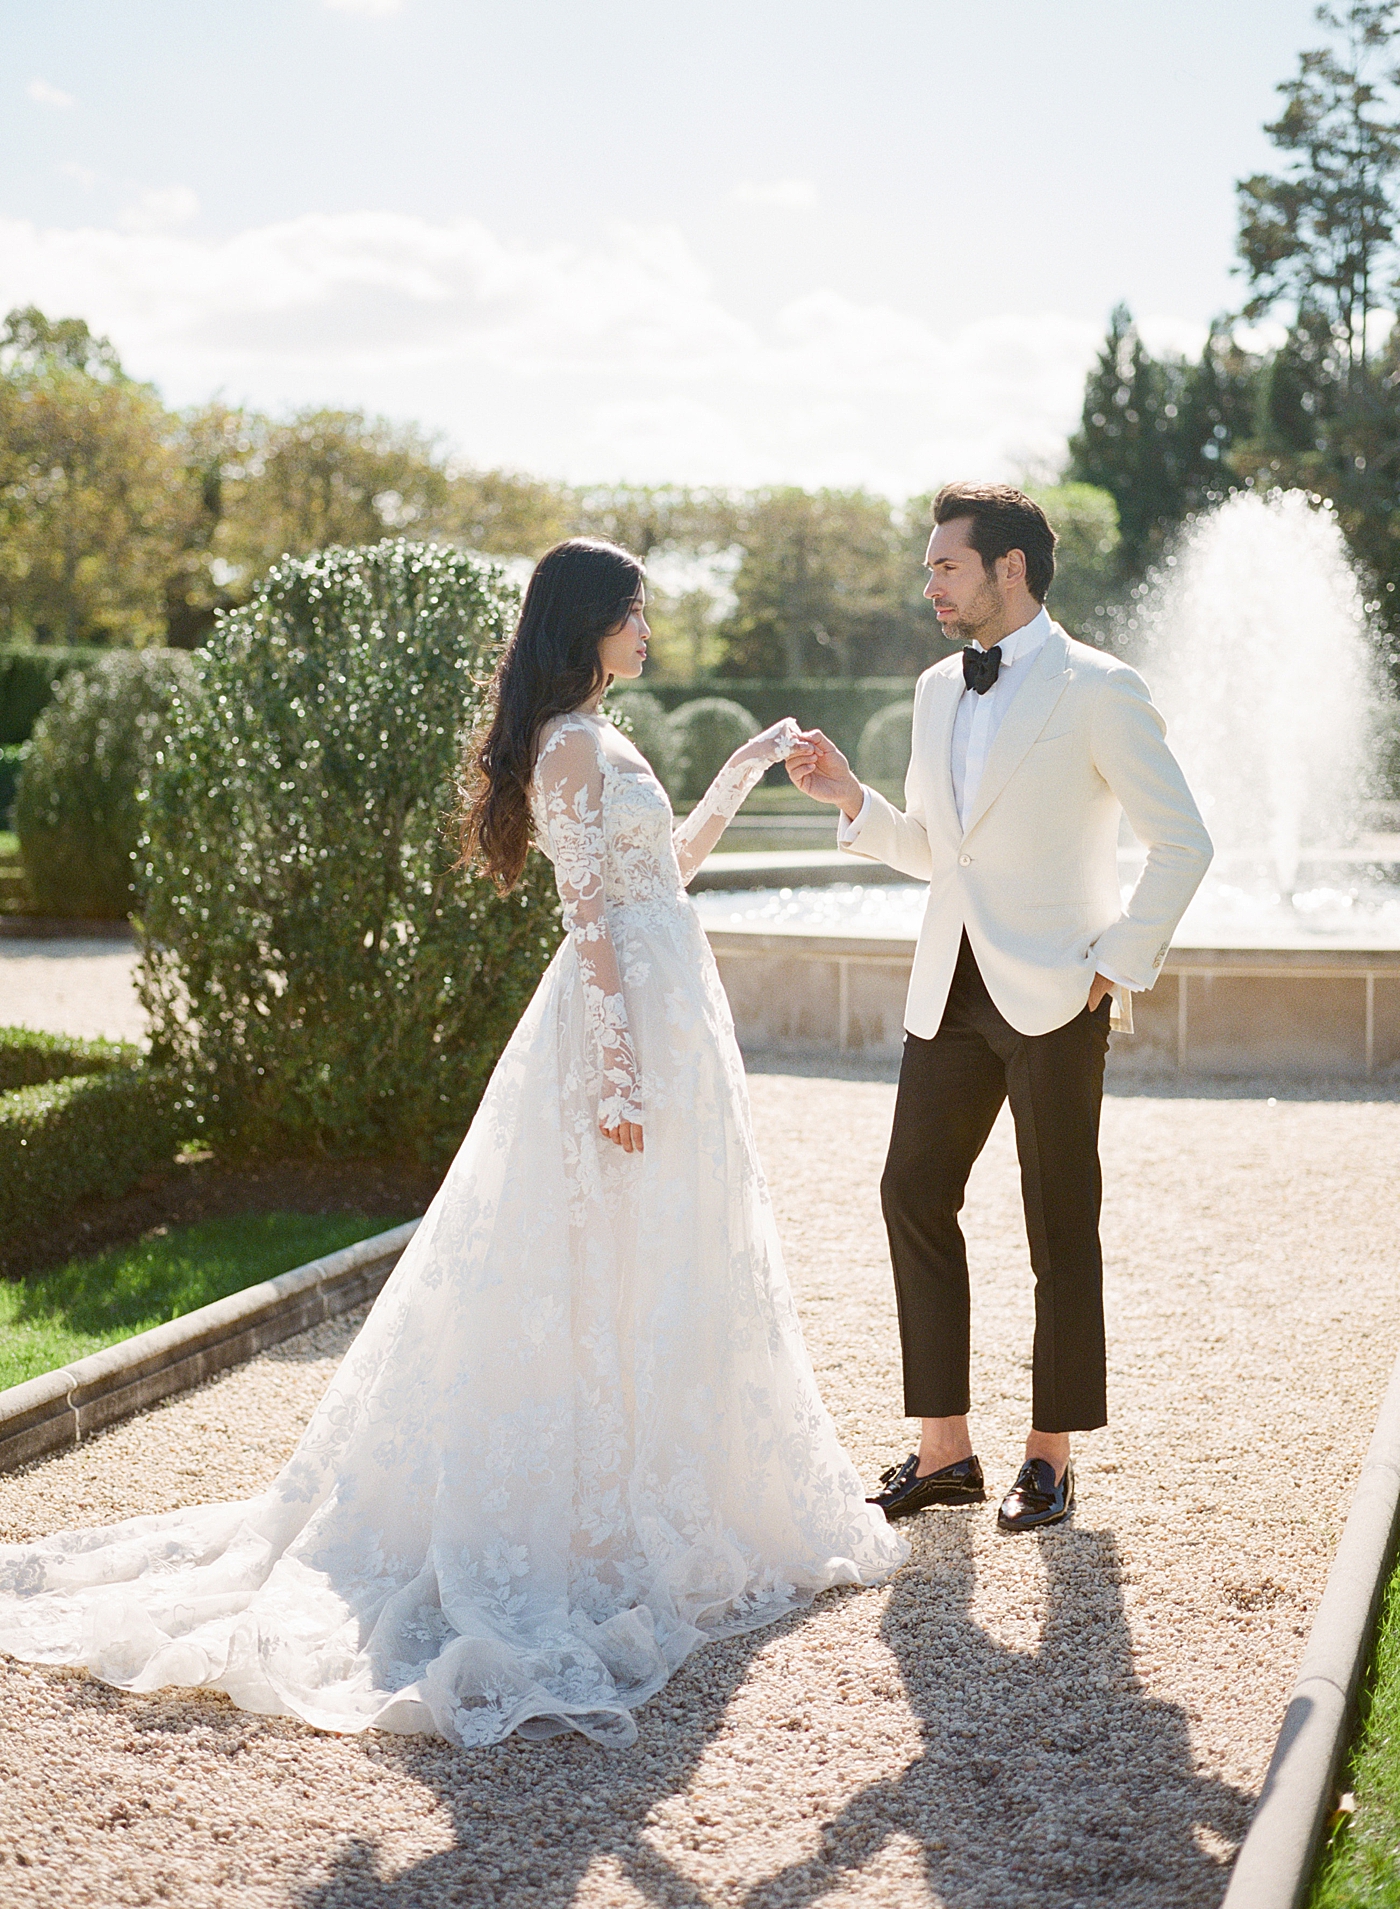 Image of a bride and groom dancing in a European garden with a fountain during Oheka castle wedding | Image by Hope Helmuth Photography